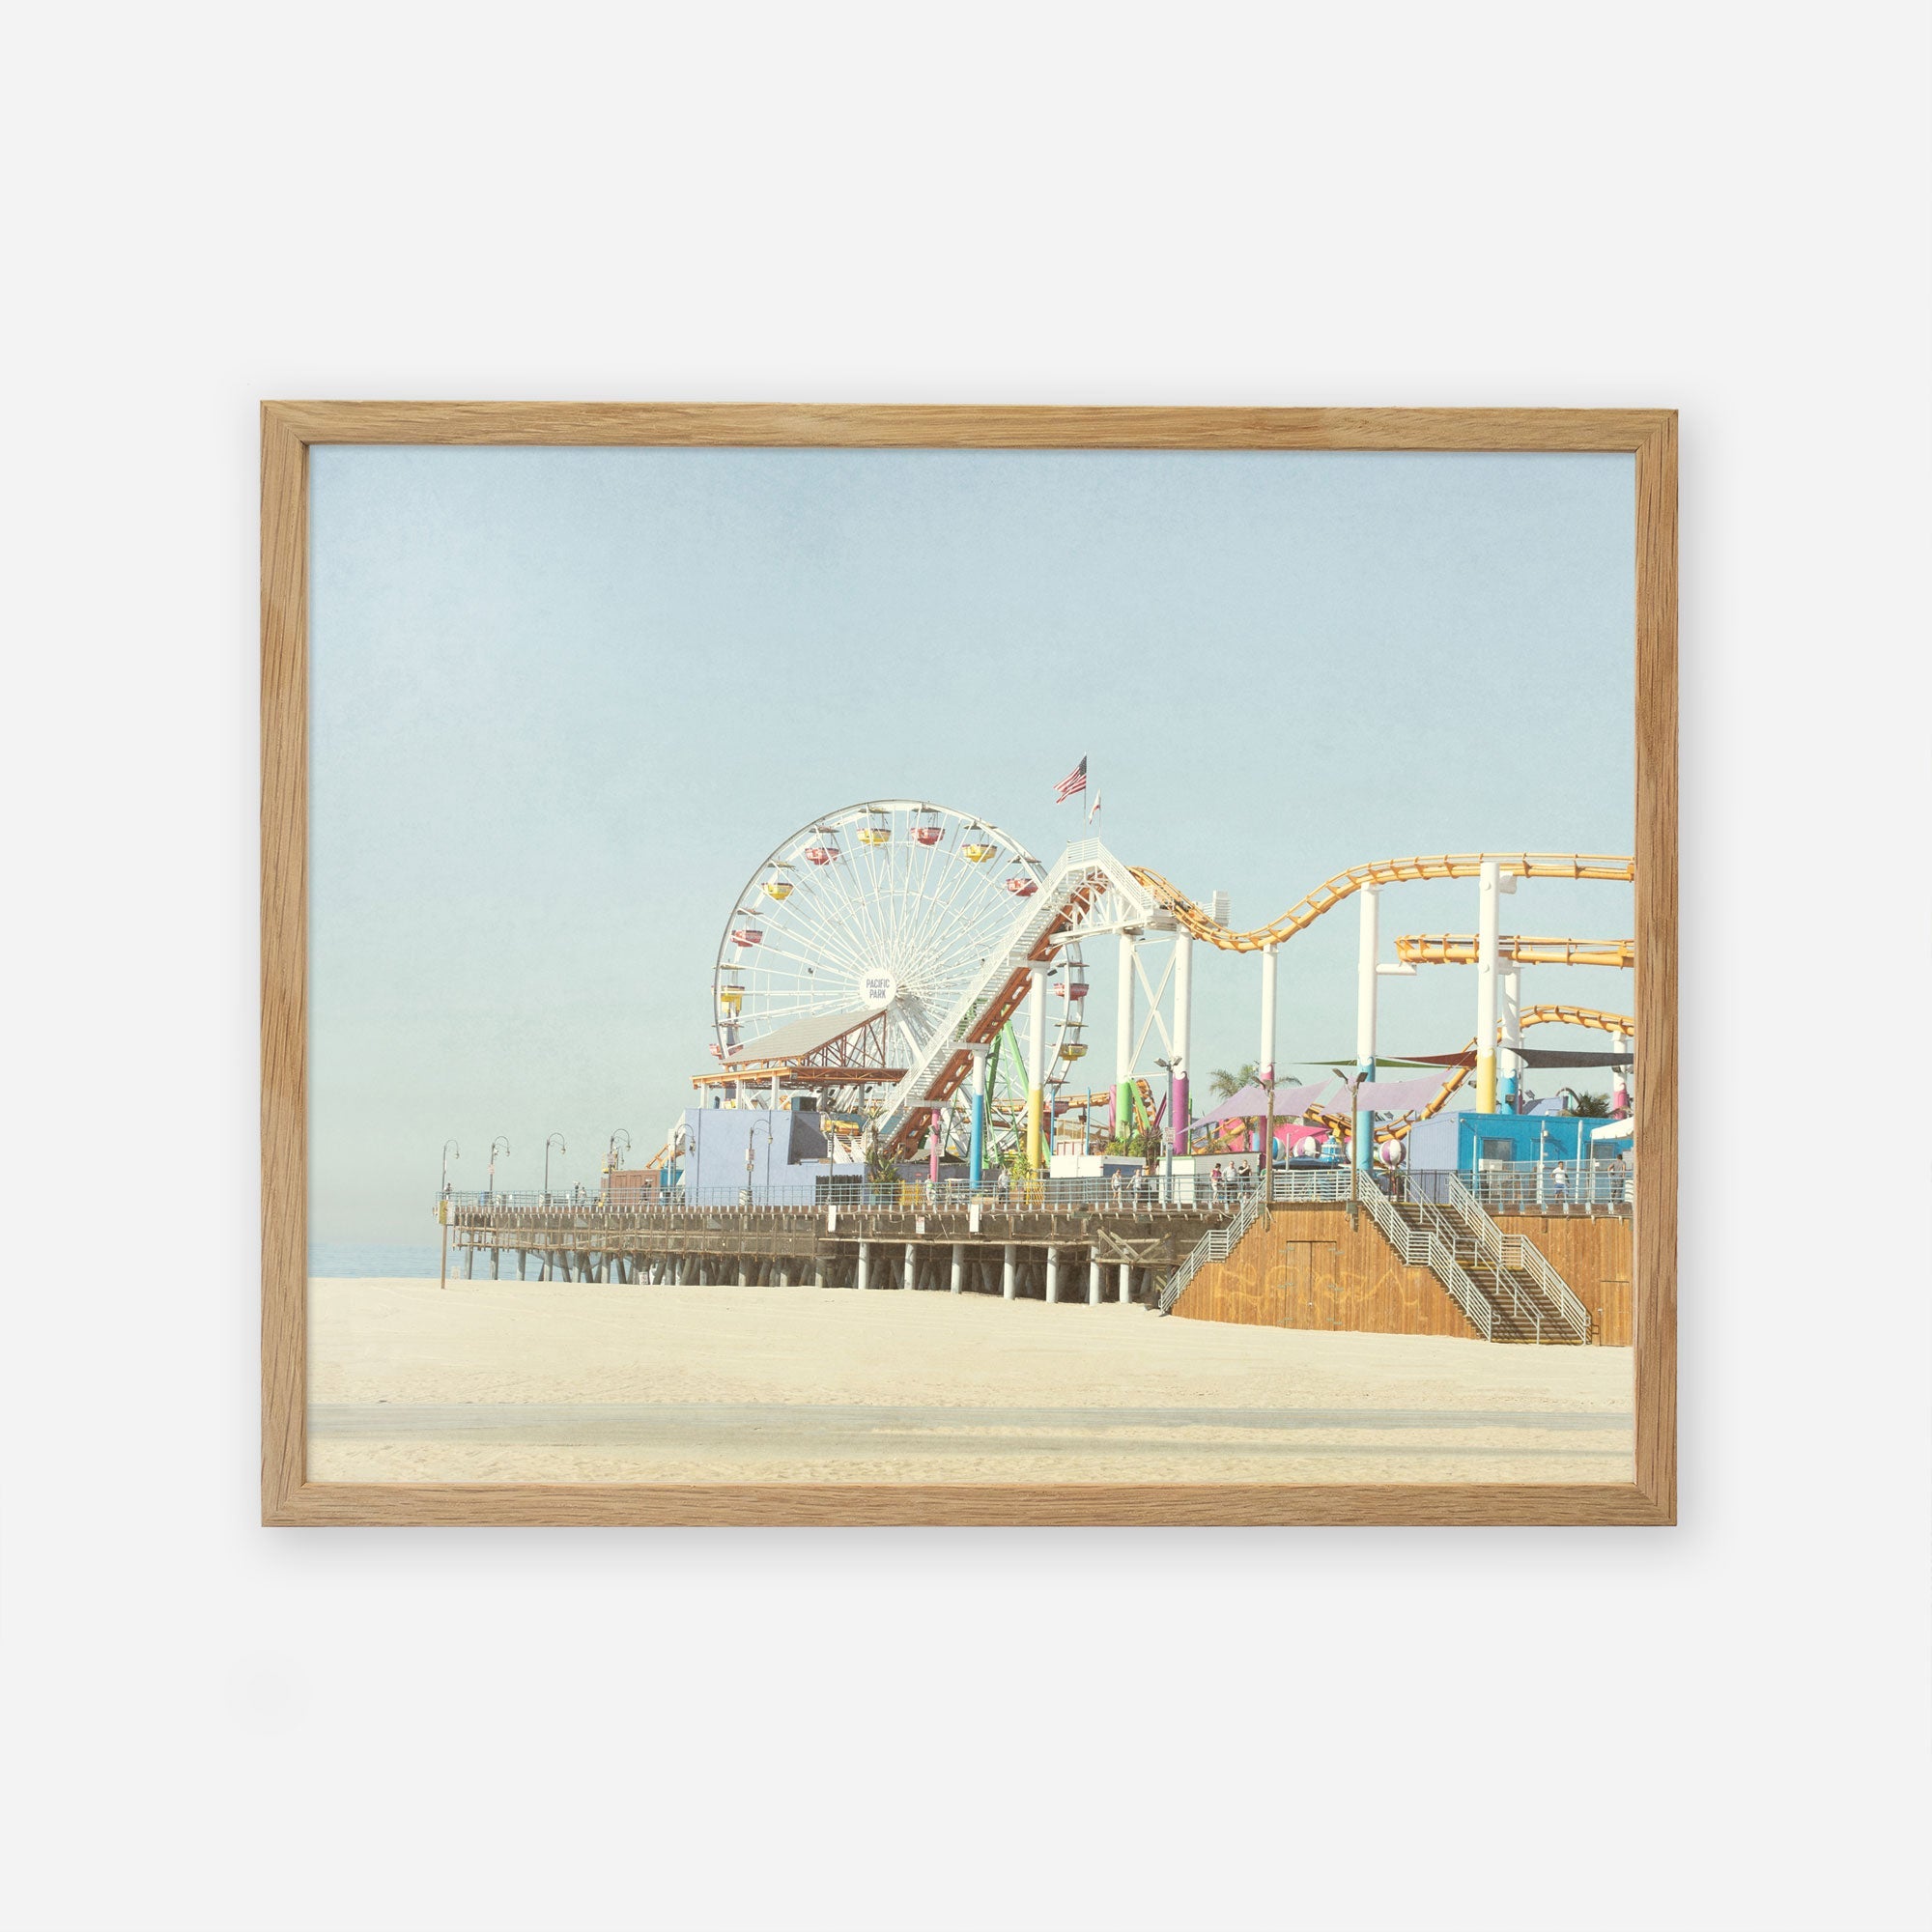 A framed painting of a lively Santa Monica Pier with a ferris wheel, roller coaster, and bustling visitors enjoying a sunny day, set against a clear blue sky - Offley Green&#39;s California Print, &#39;Santa Monica Pier&#39;.